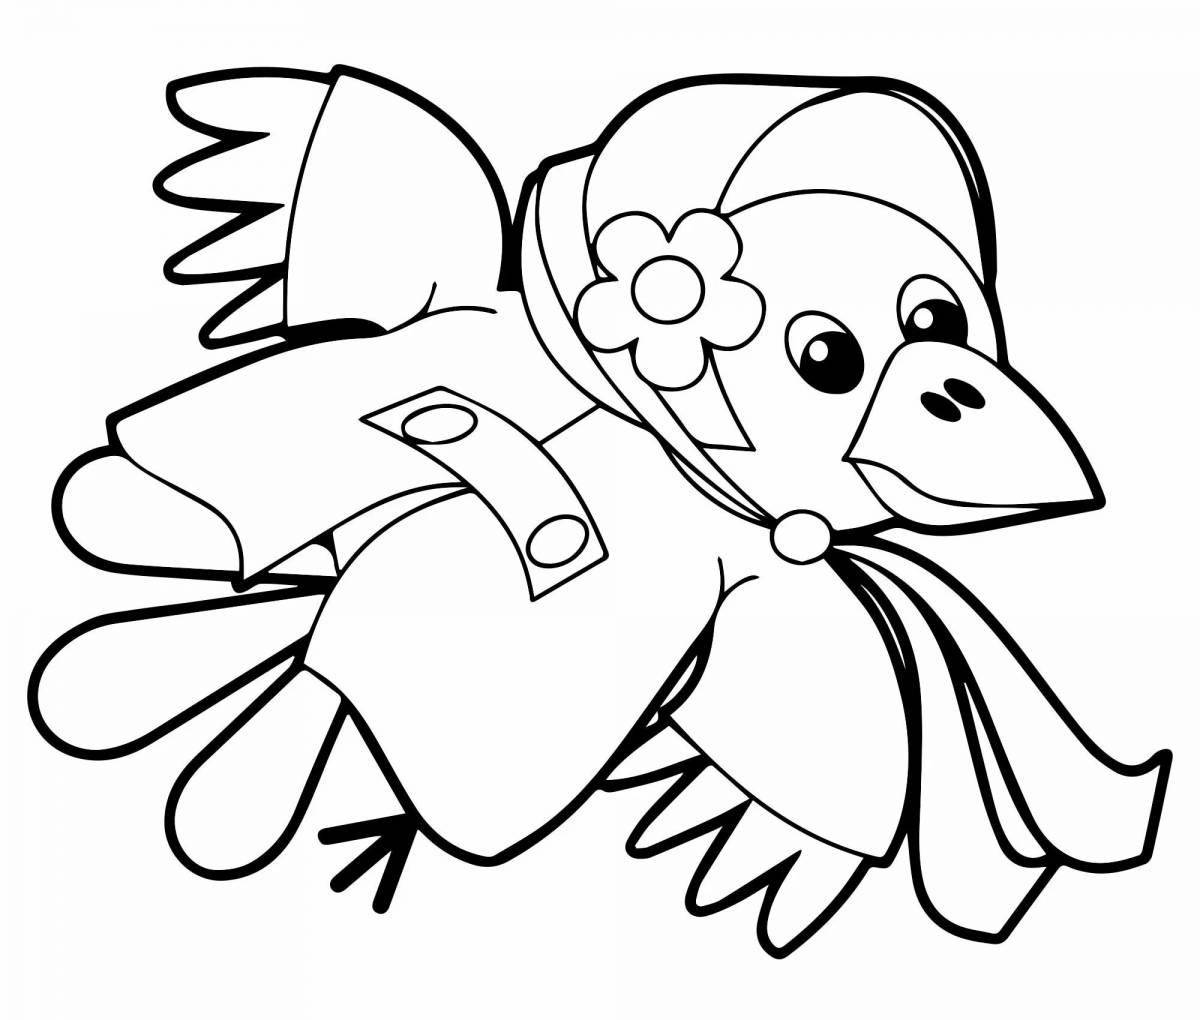 Adorable crow coloring book for children 6-7 years old